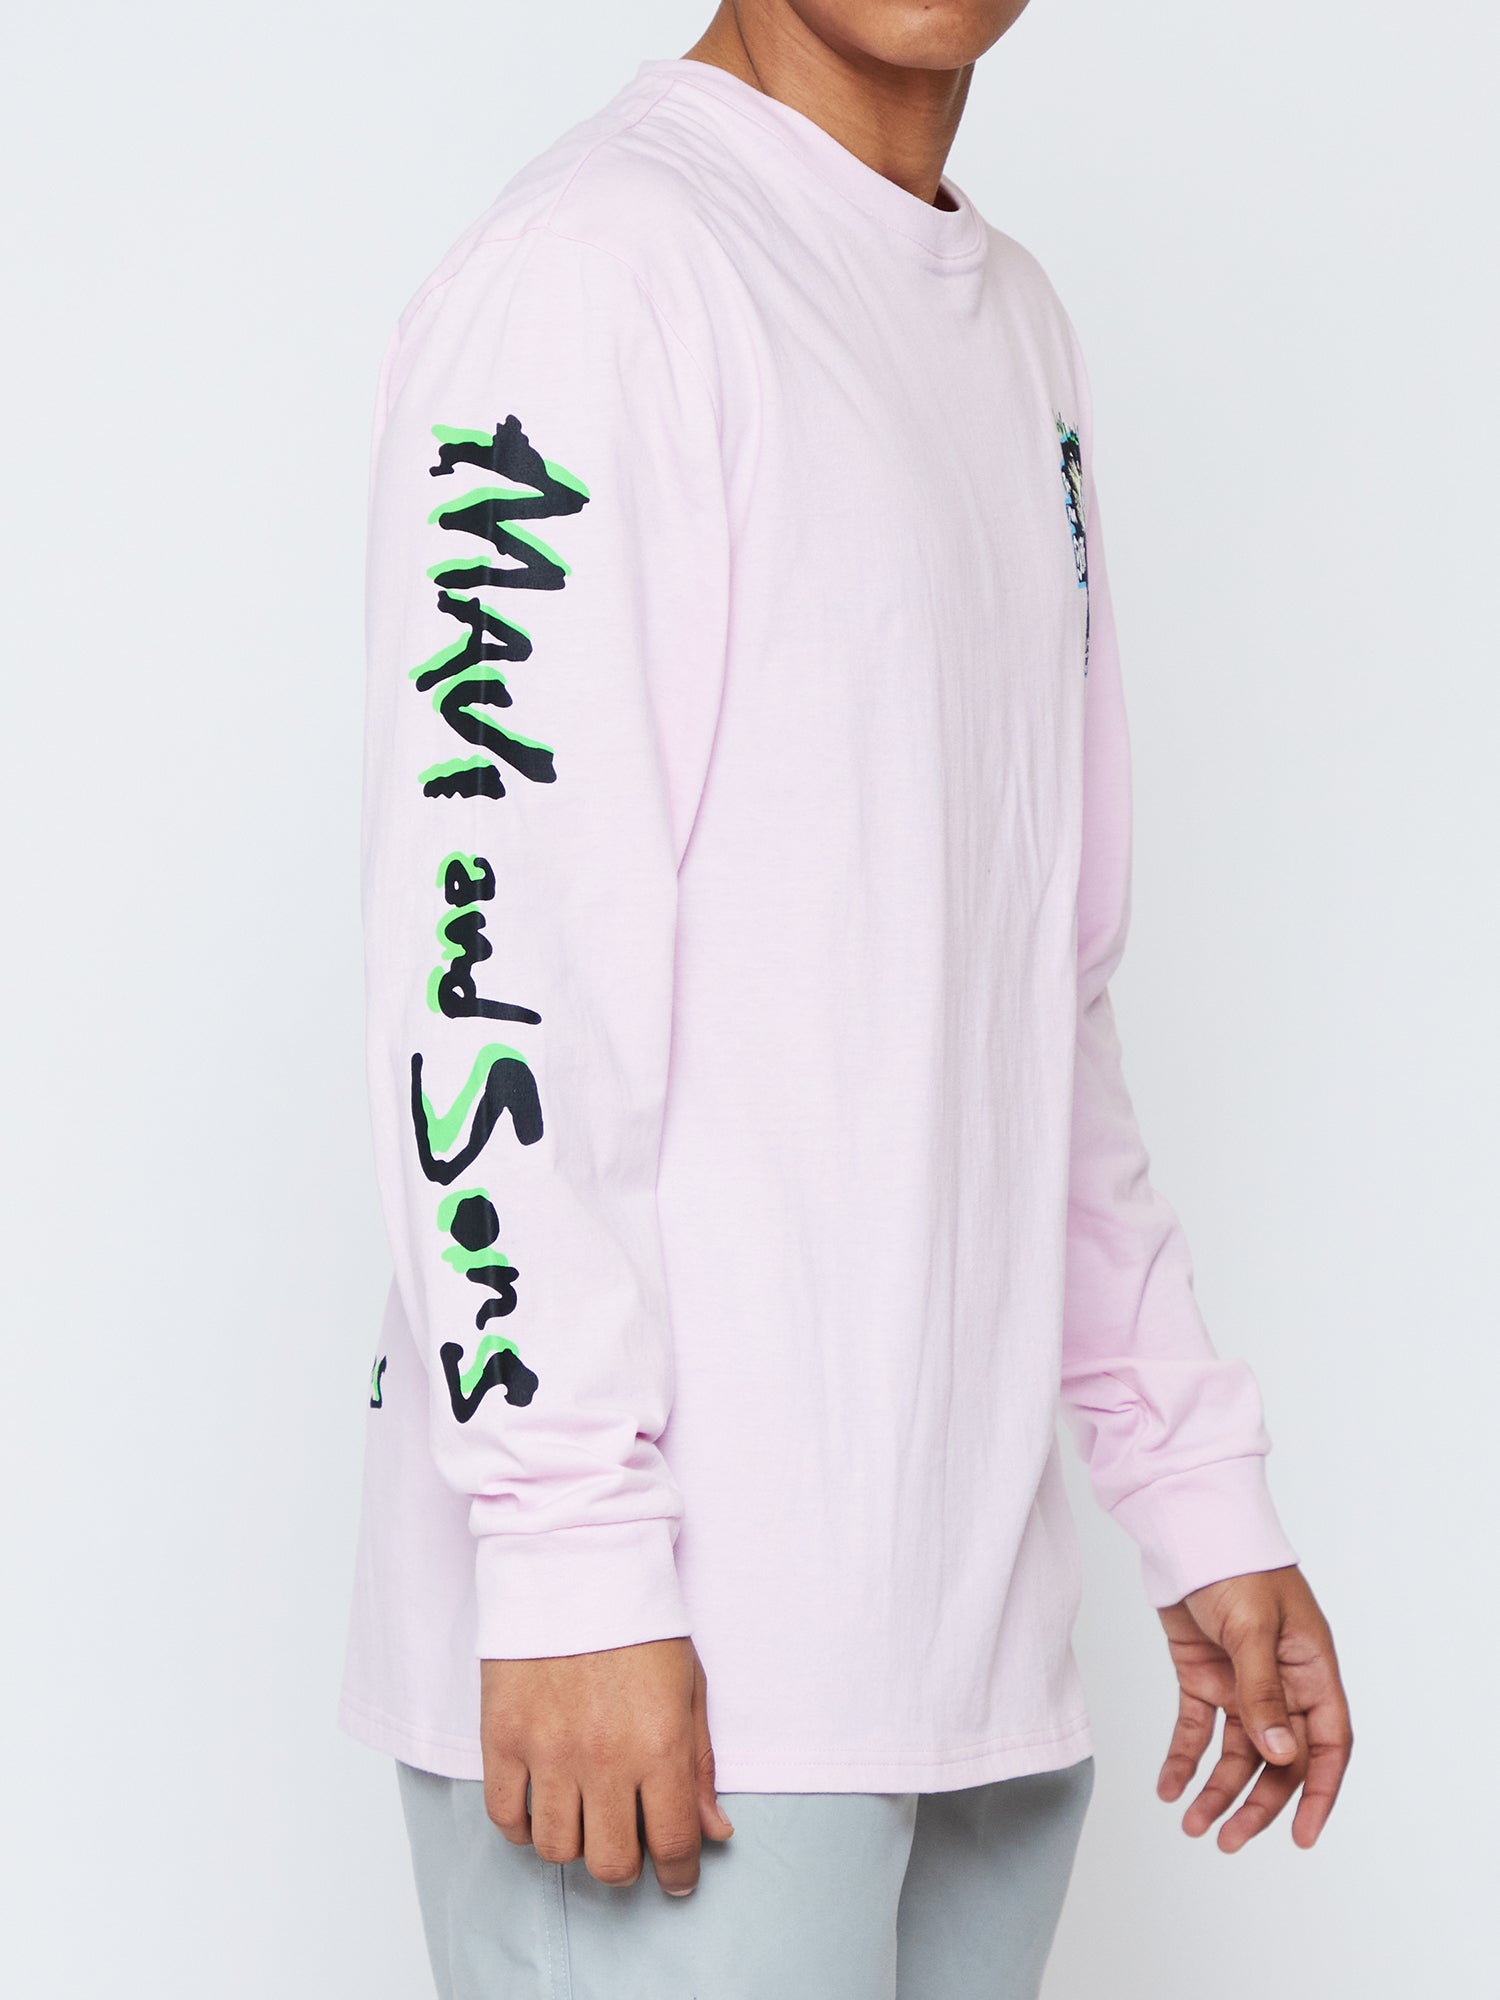 Maui and Sons x Madrid Srfmouth Long Sleeve